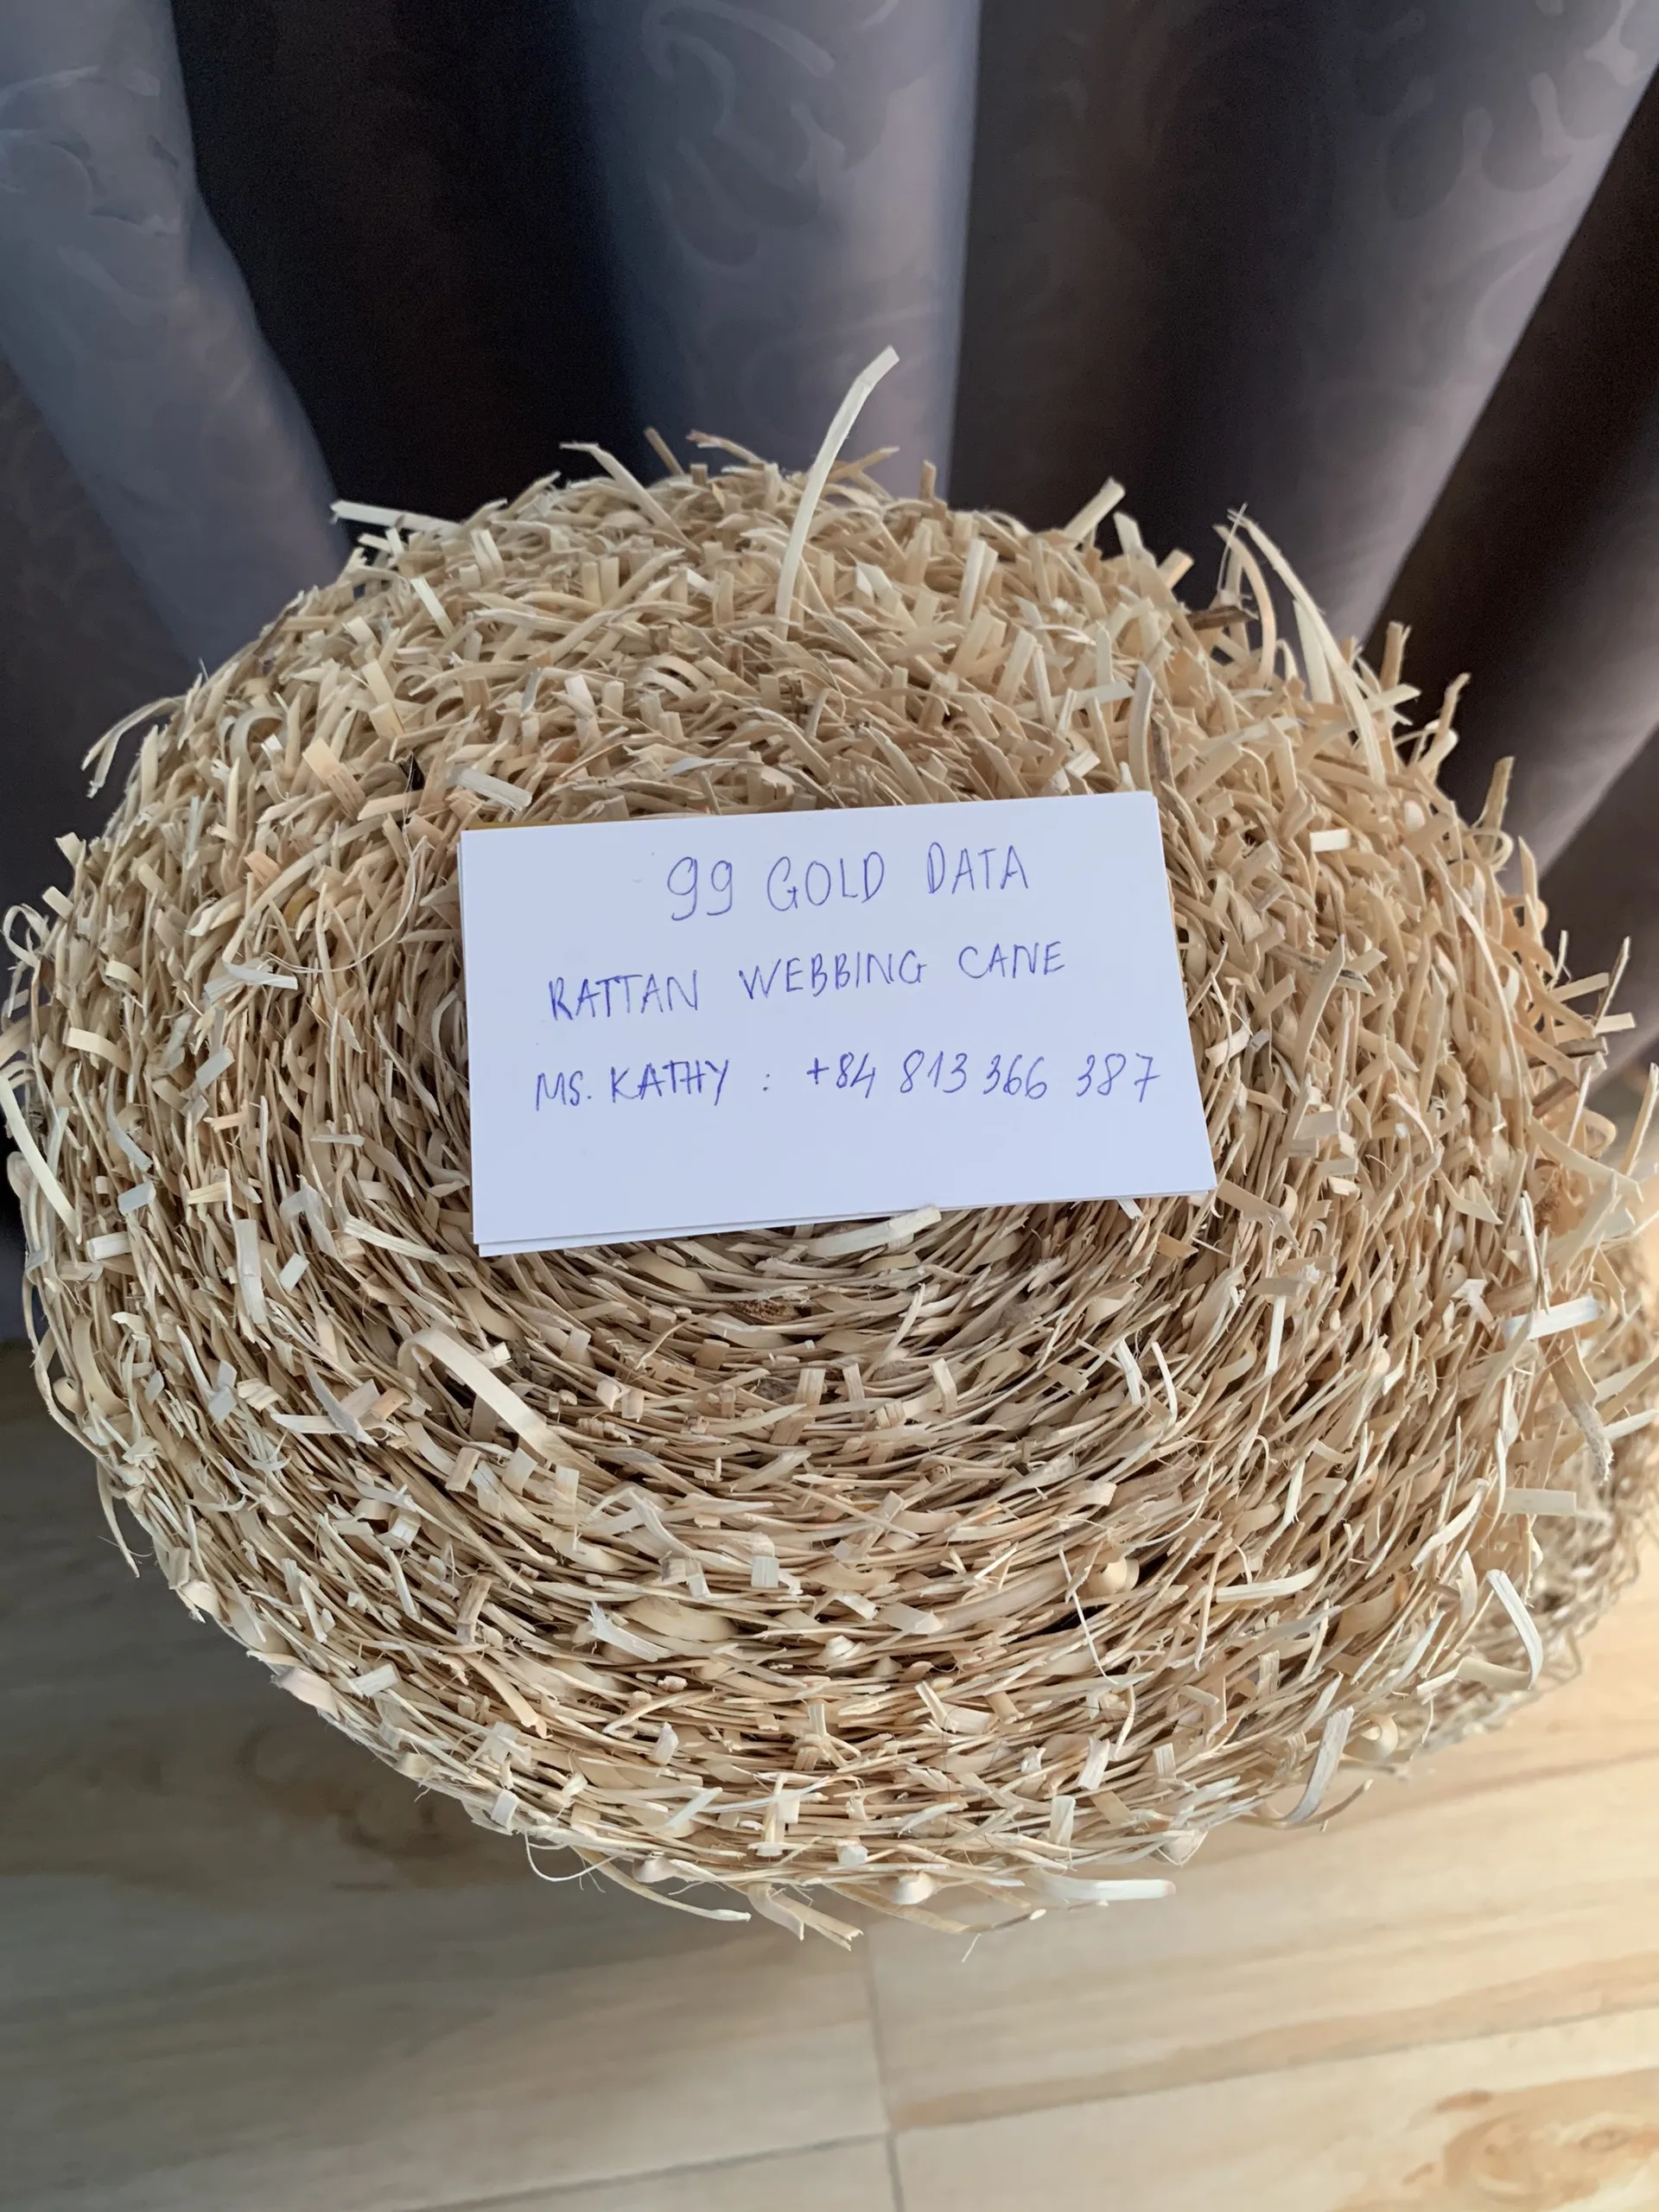 
Top quality Natural cane webbing made from rattan peel sheet Natural Hand woven rattan cane webbing for making chairs 